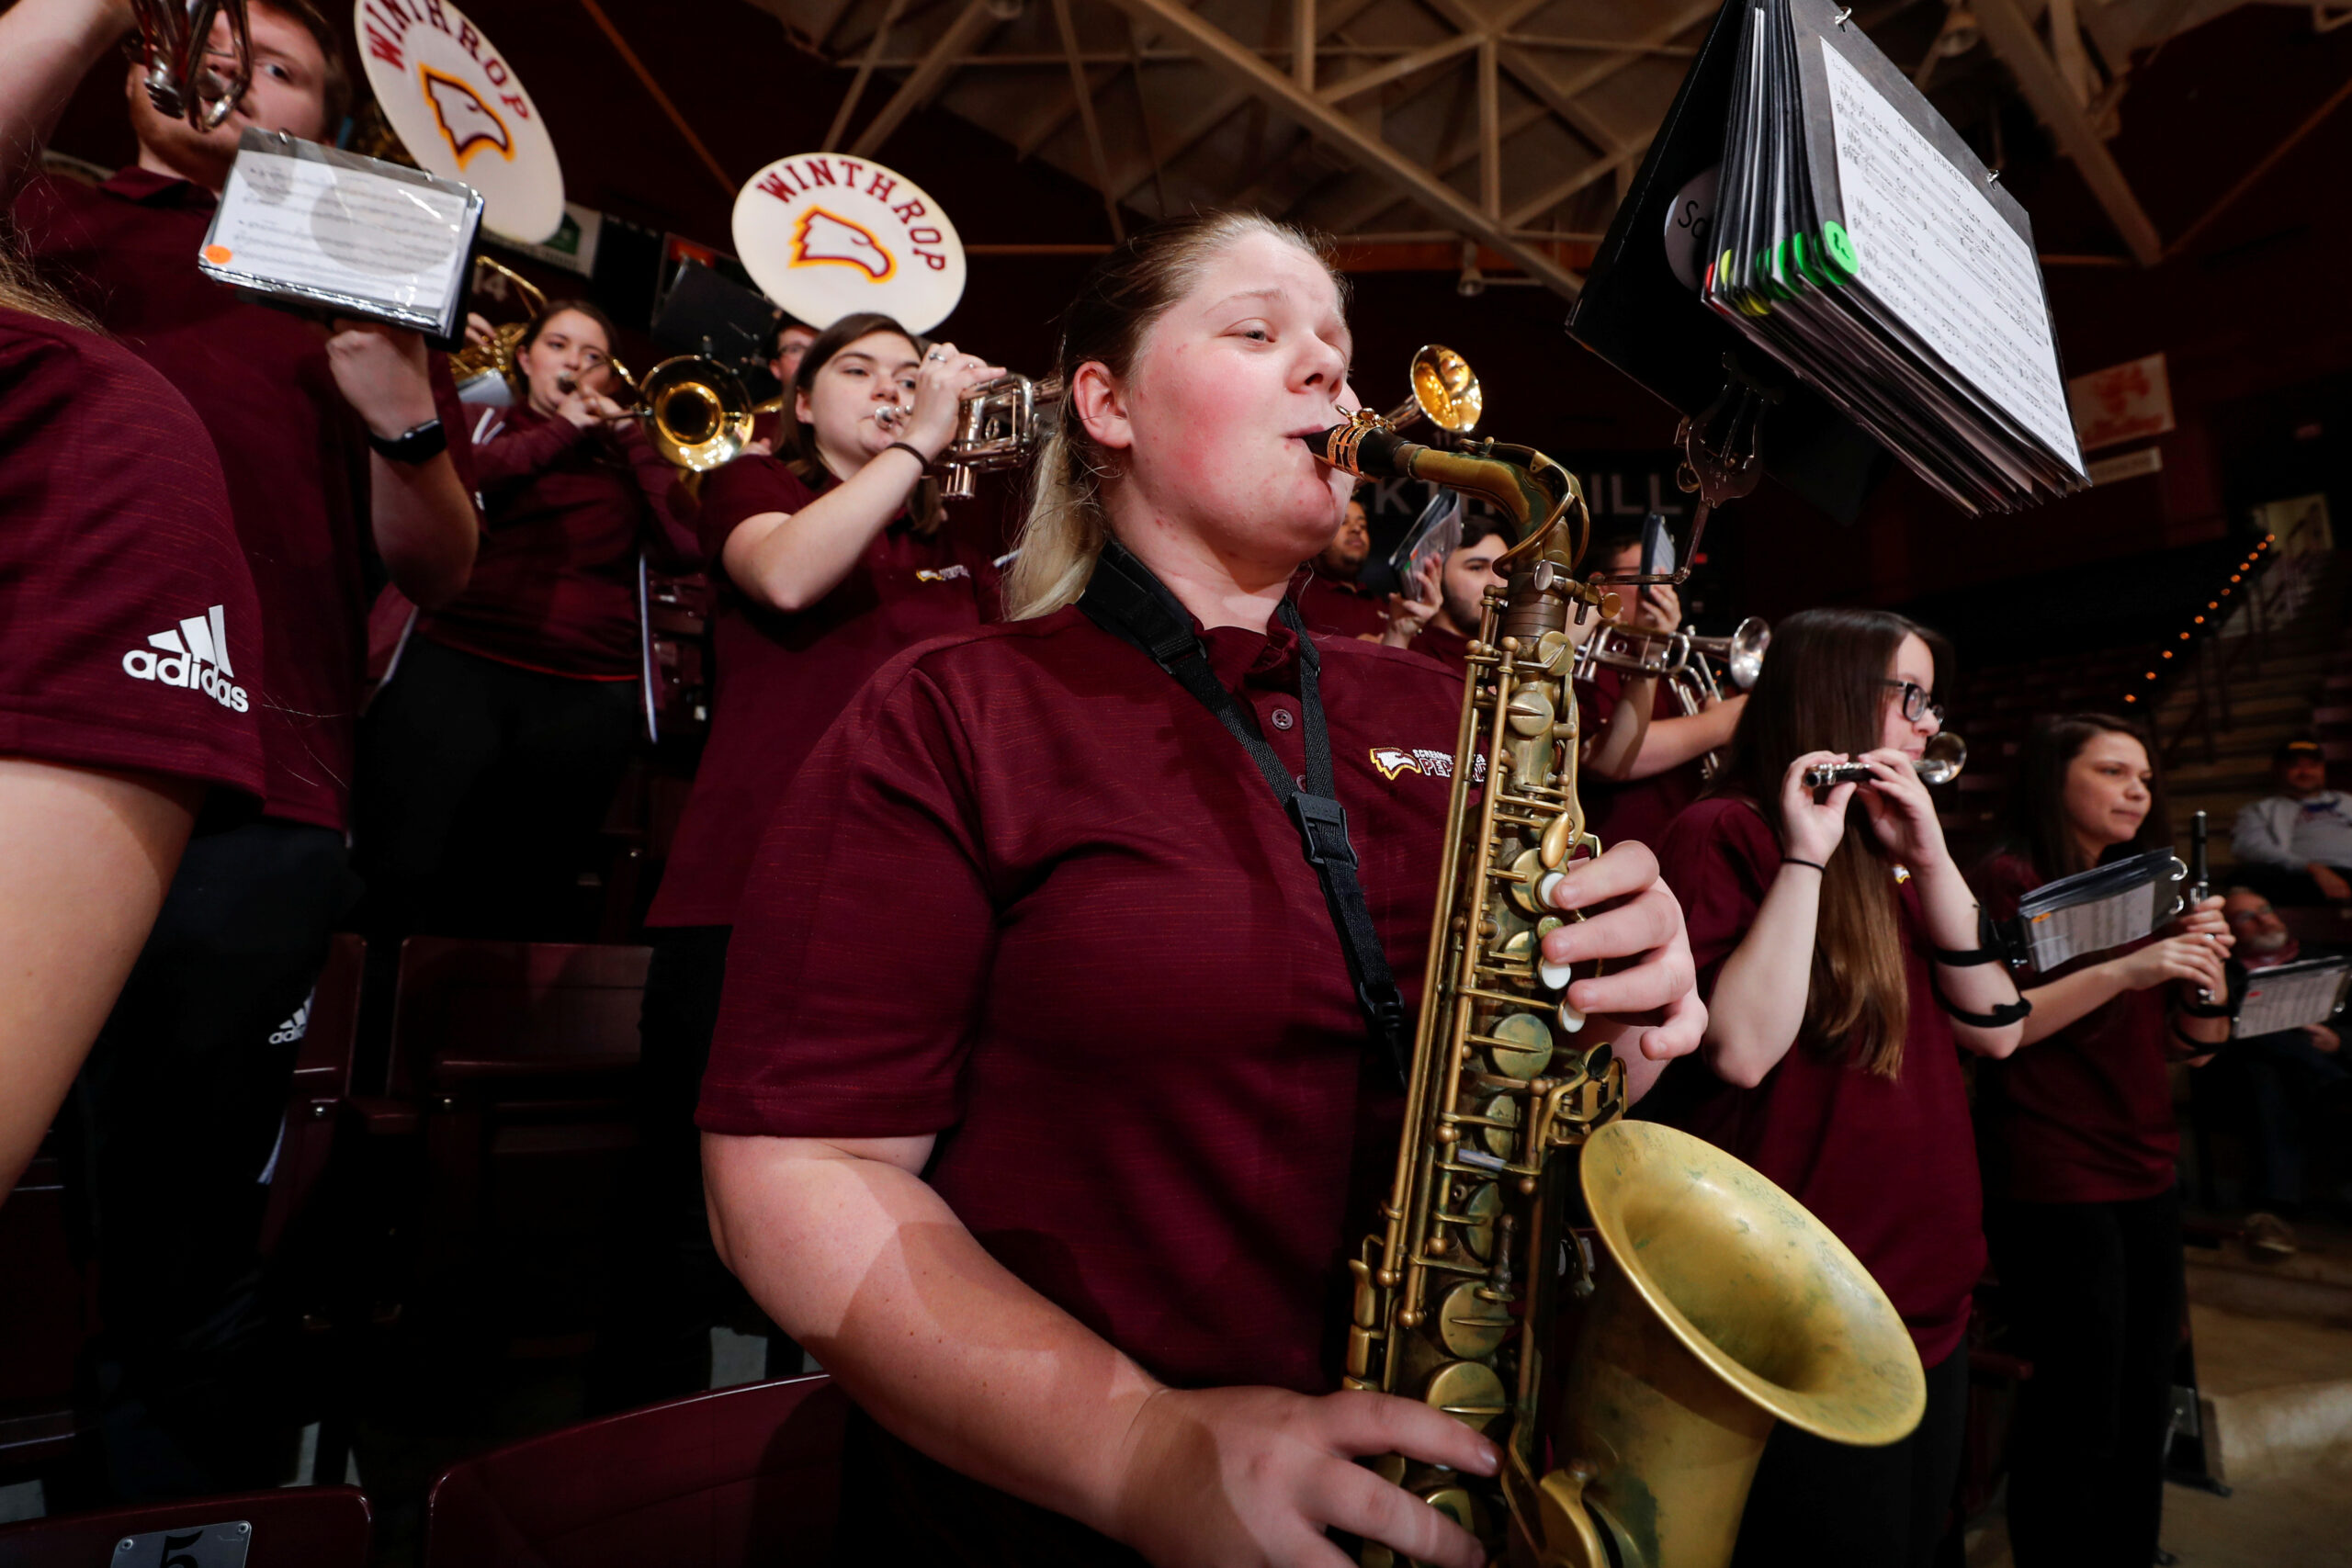 Pep band temporarily cut from funding